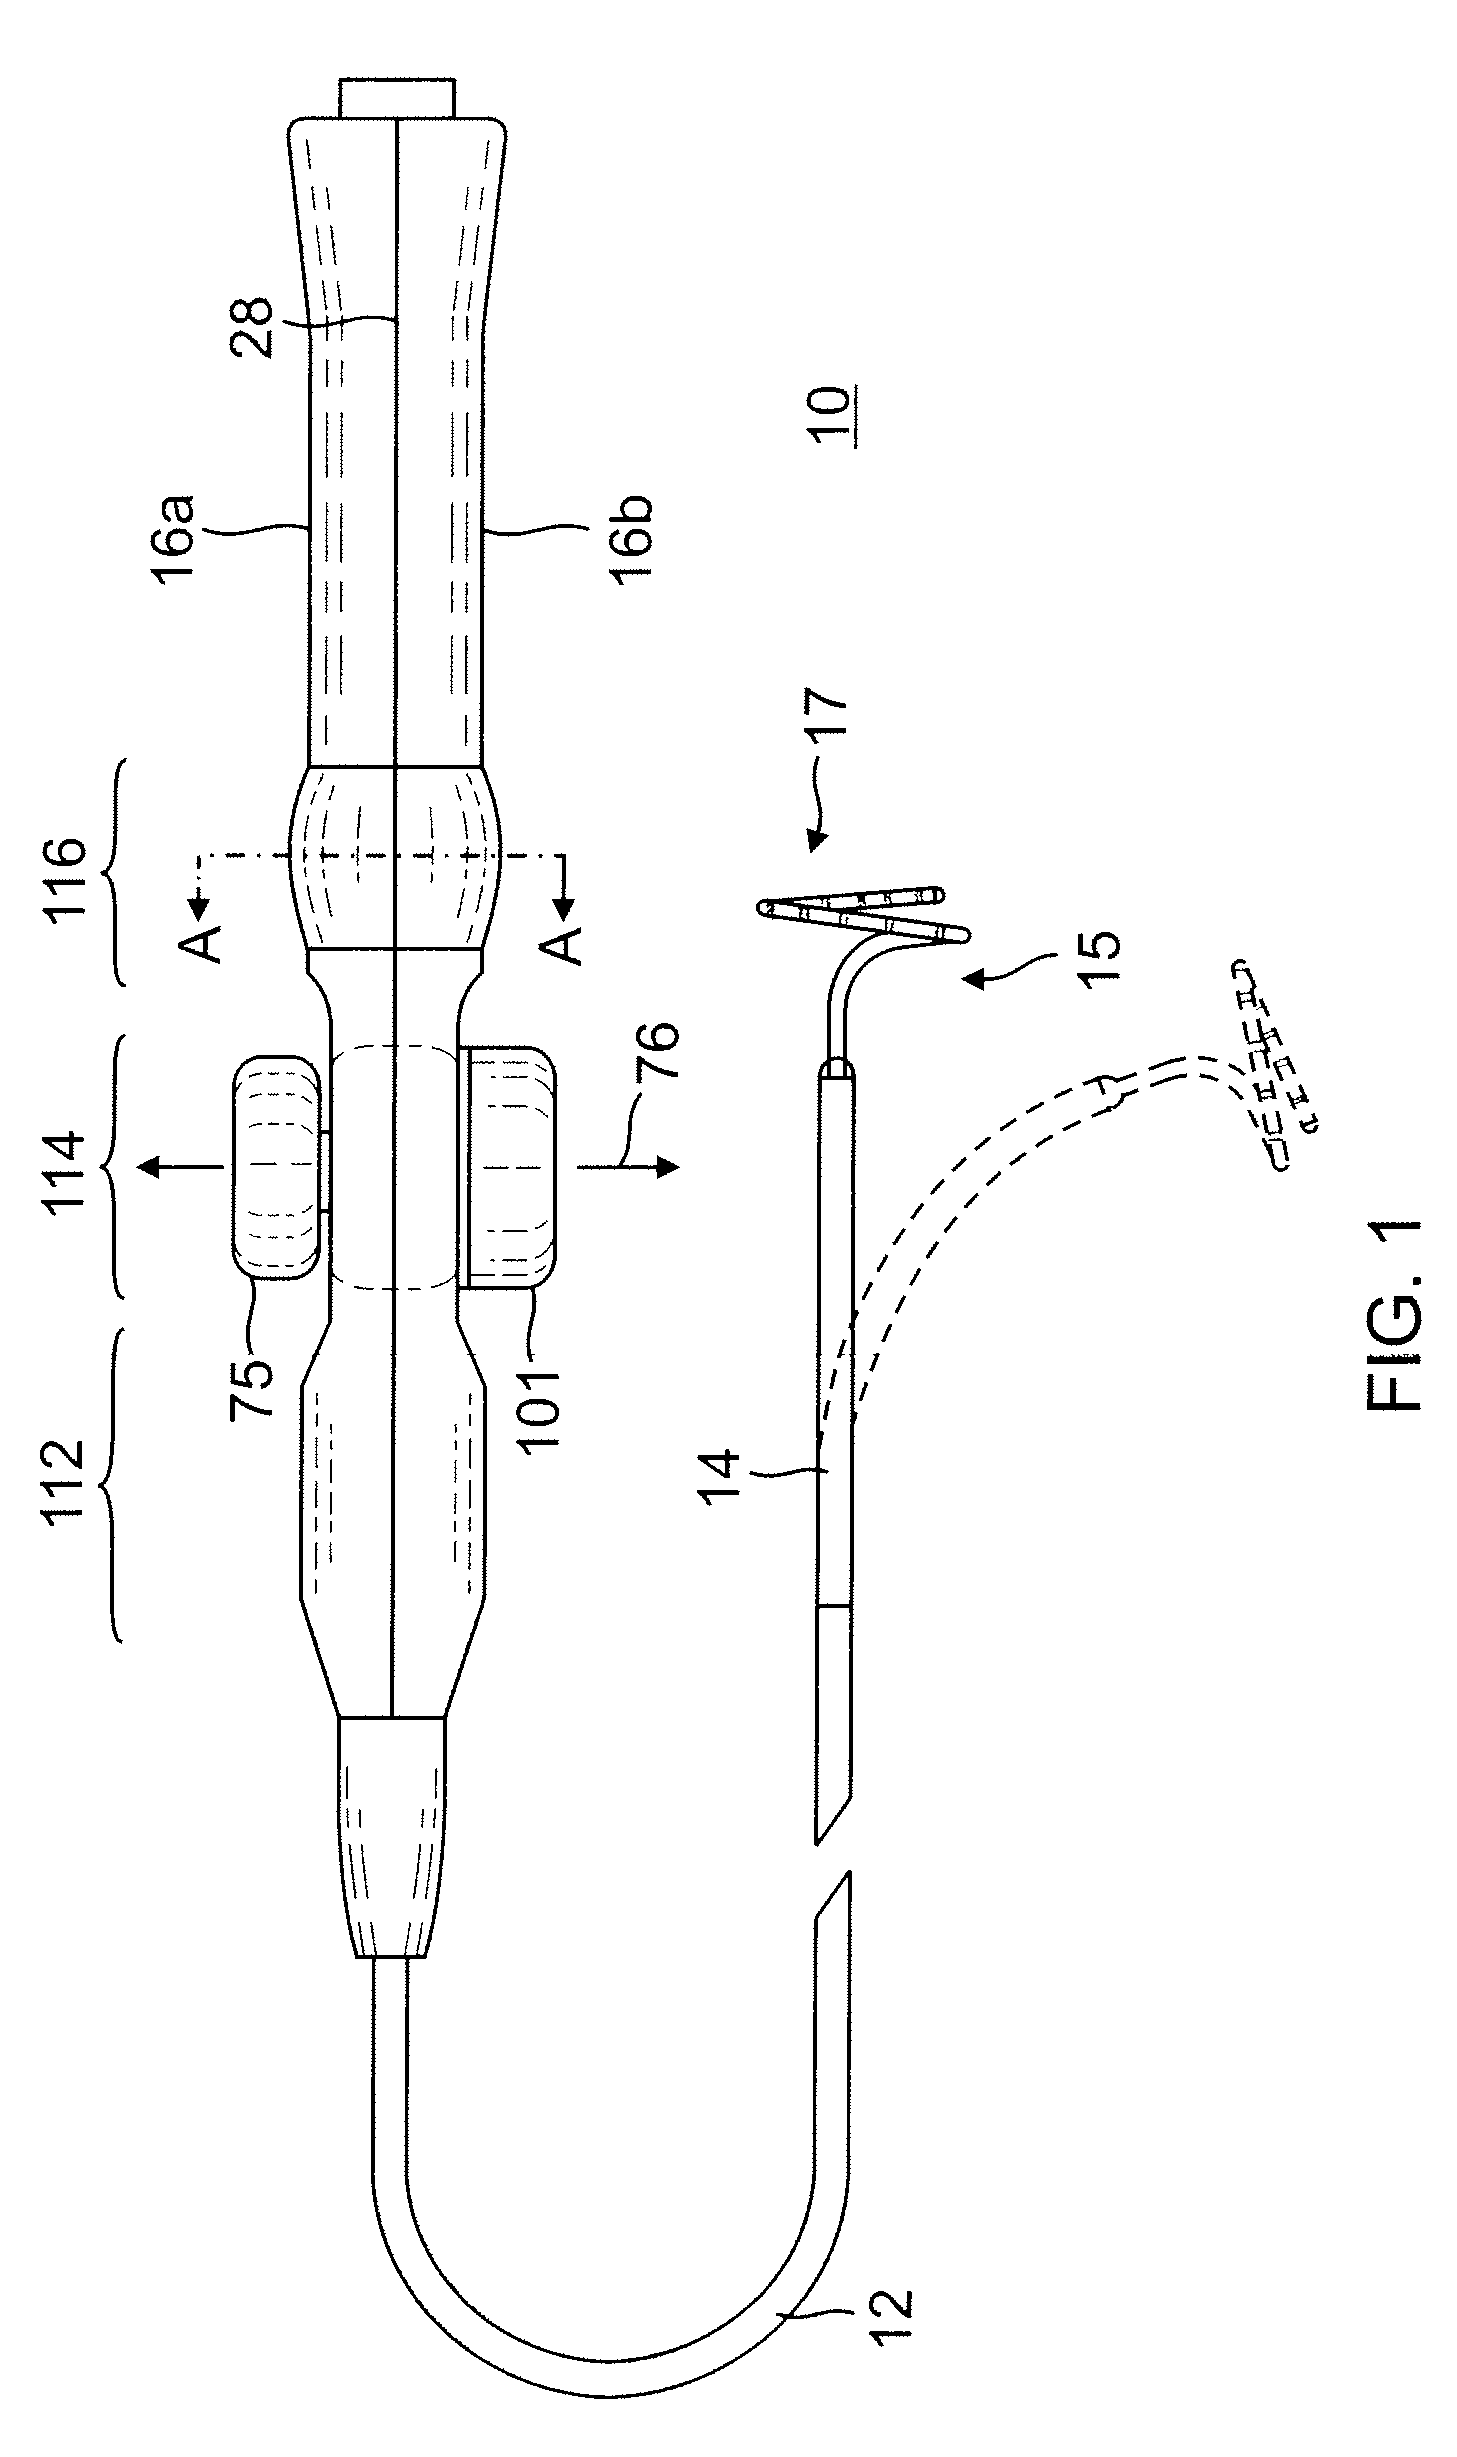 Catheter with multi-functional control handle having linear mechanism